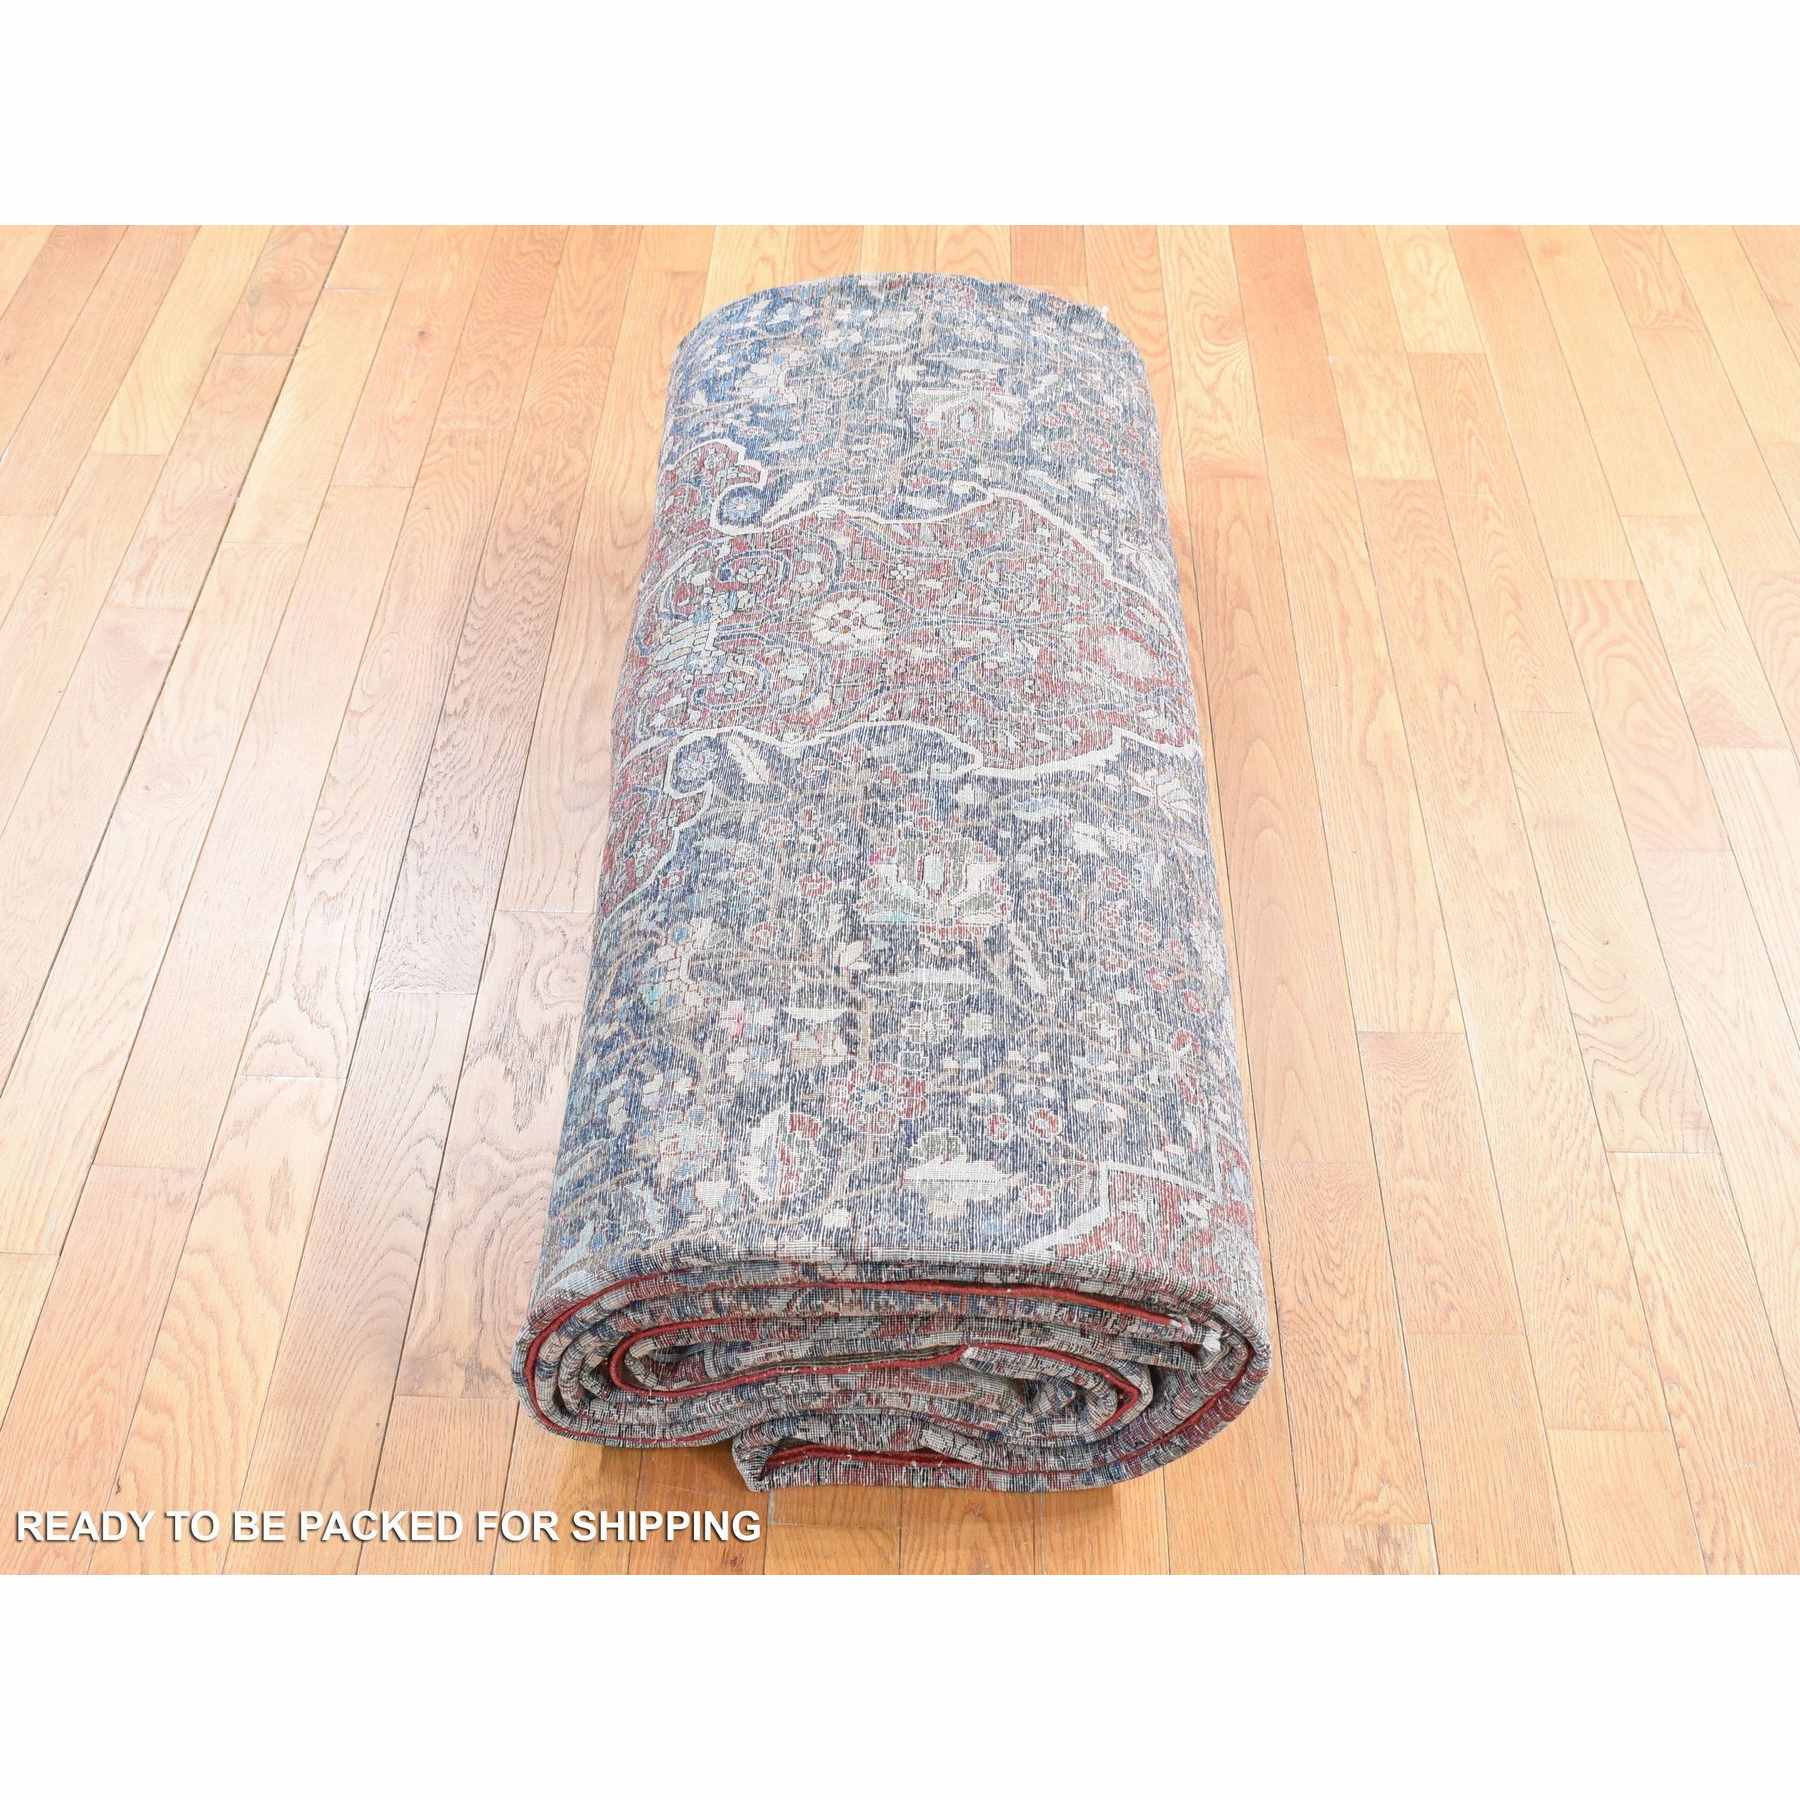 Antique-Hand-Knotted-Rug-403895